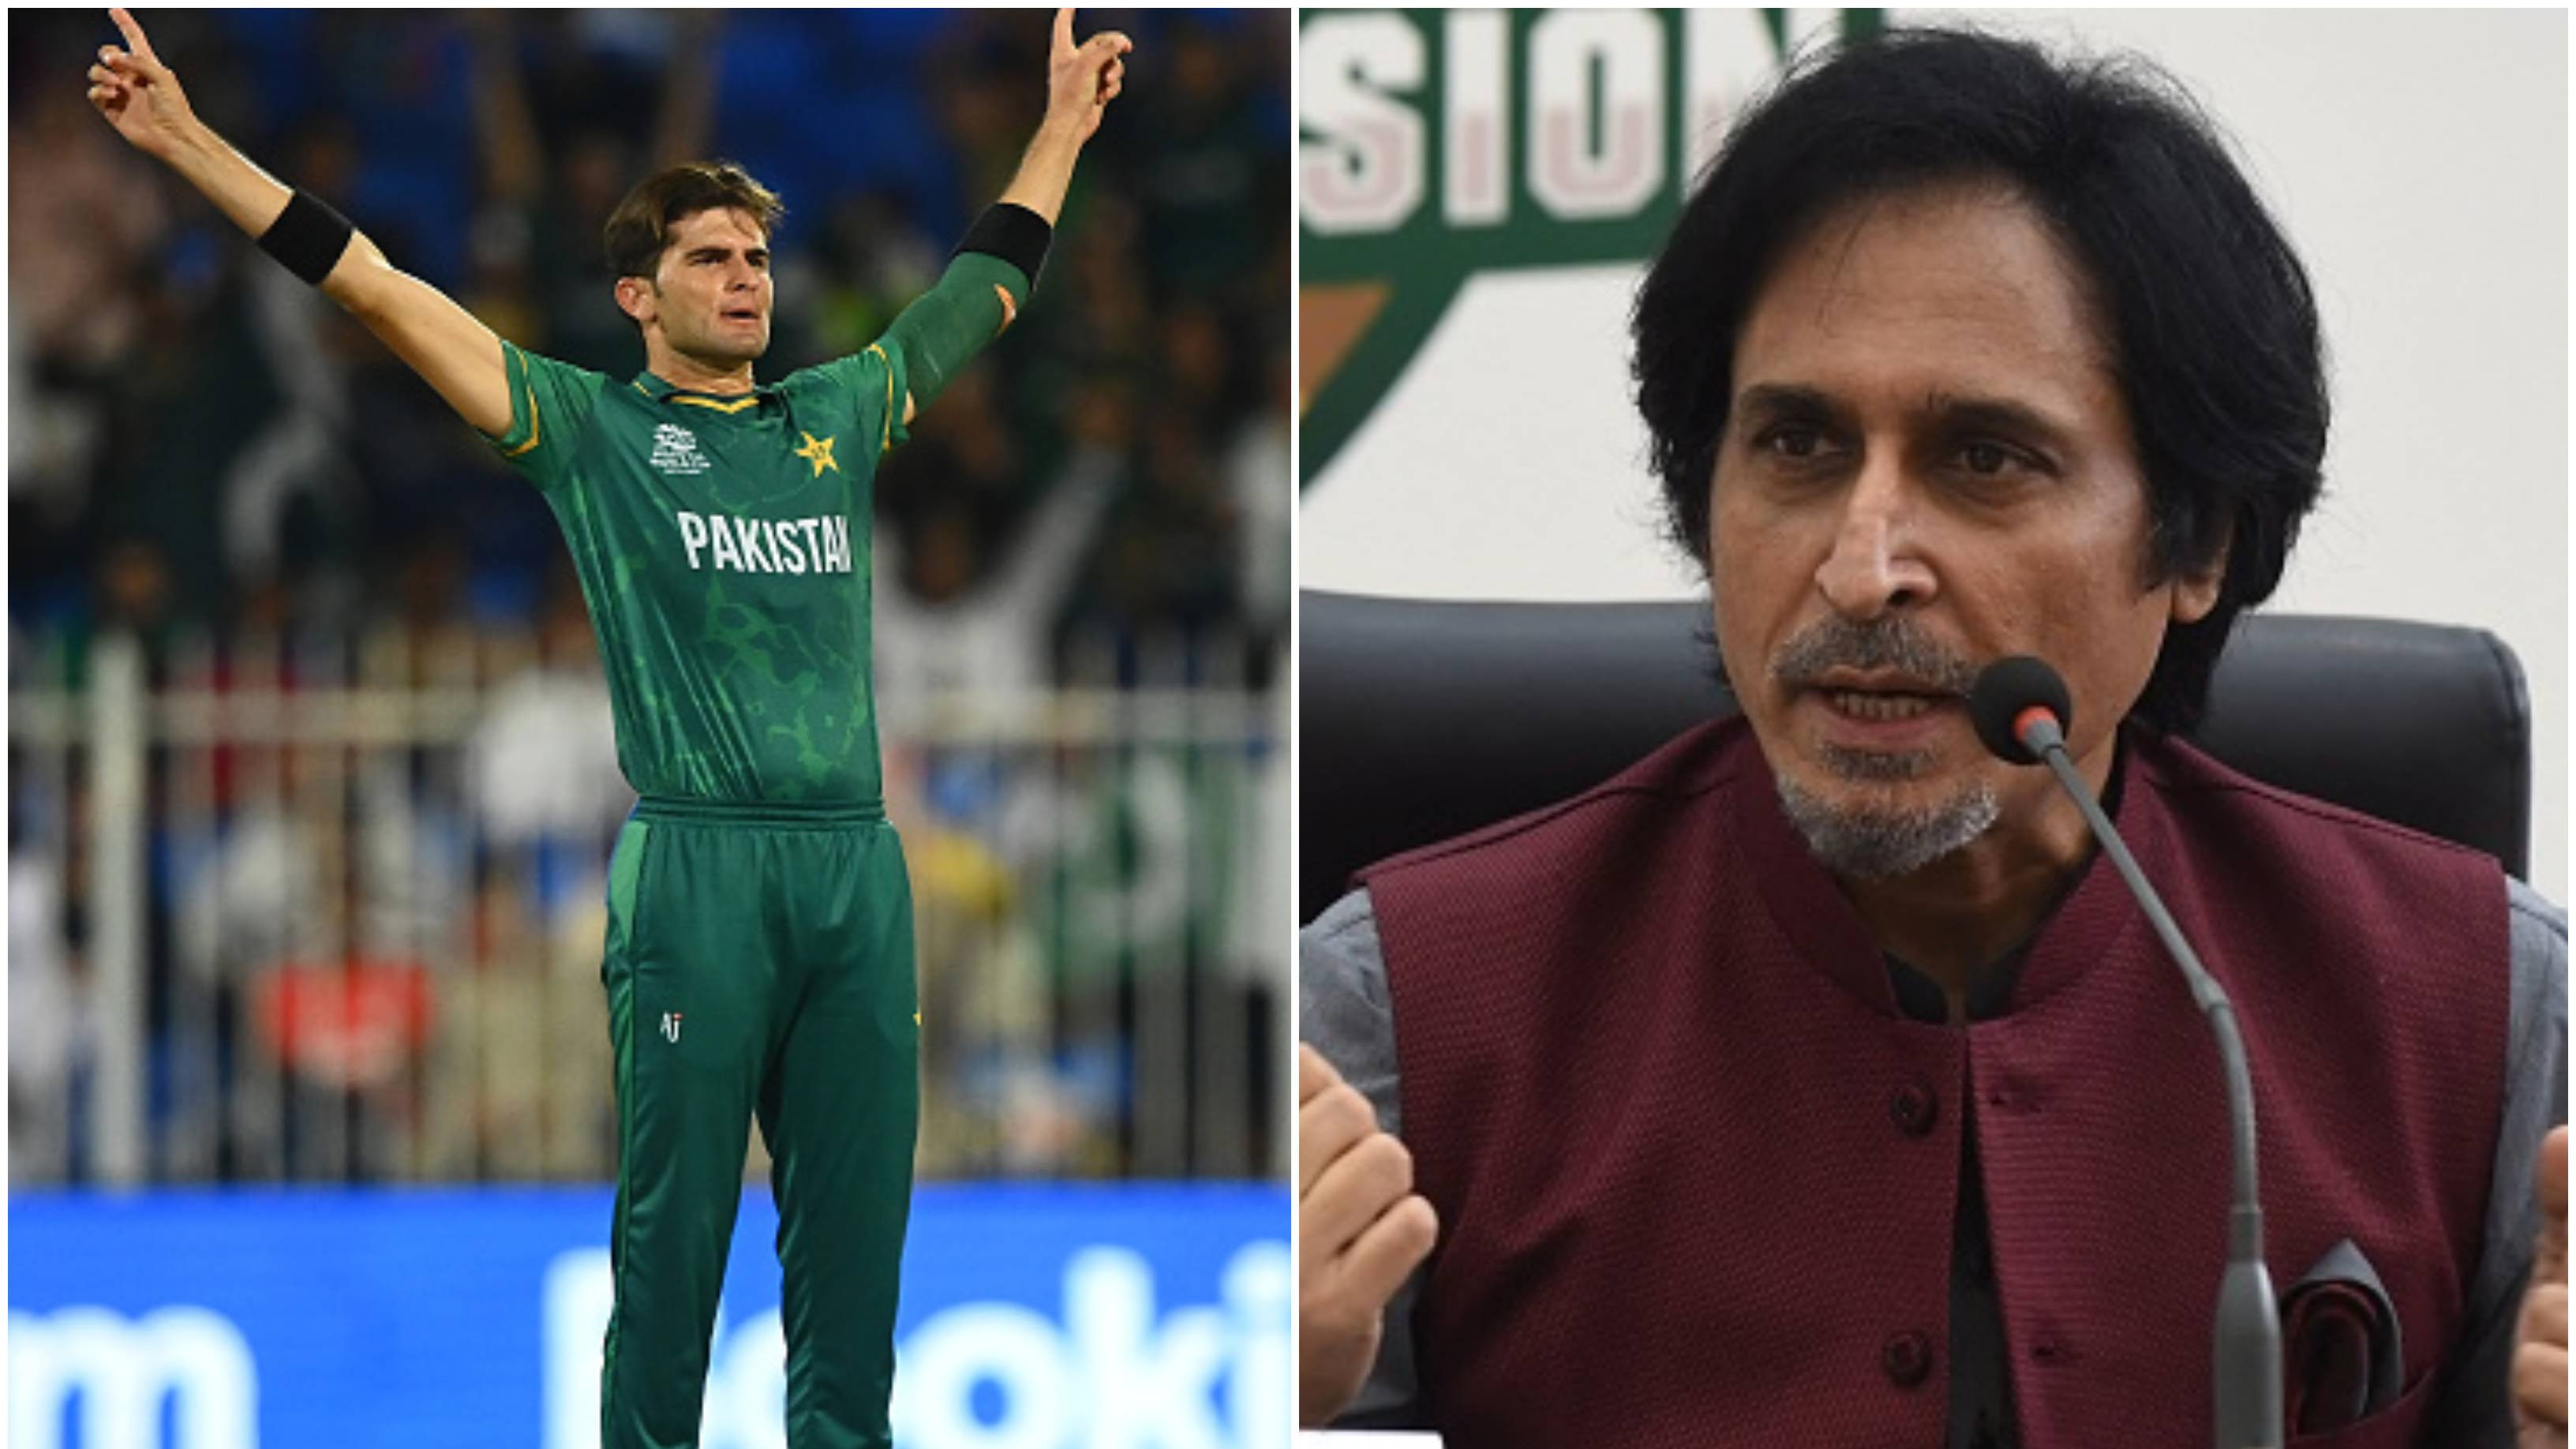 “He is 90 percent ready,” Ramiz Raja provides update on Shaheen Afridi’s availability for T20 World Cup 2022